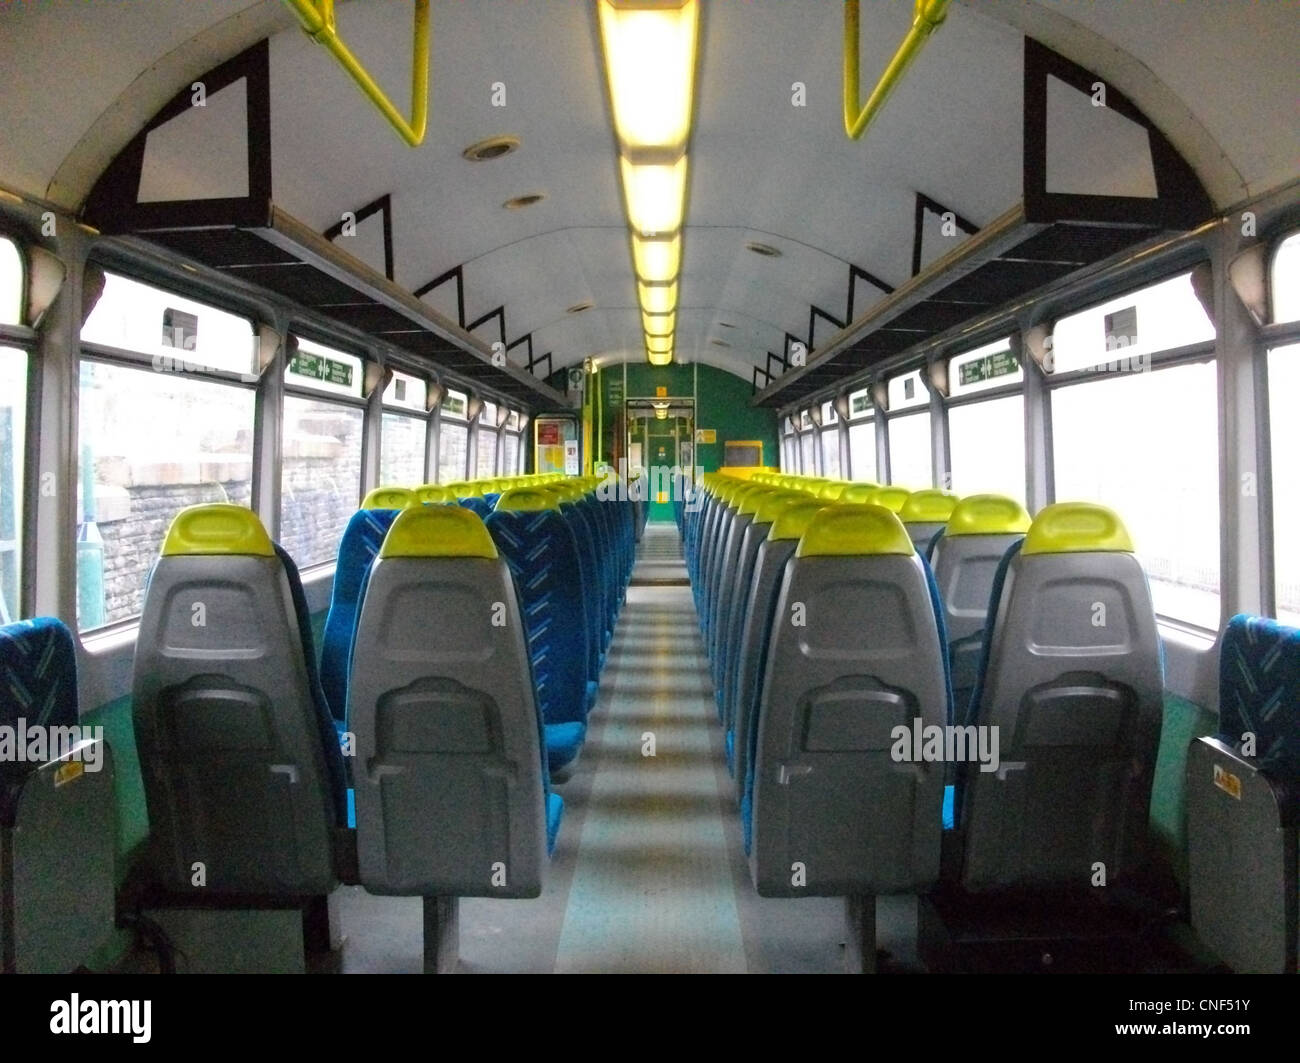 The interior of a recently refreshed Arriva Trains Wales Class 143 - showing retrimmed seats in Arriva moquette Stock Photo